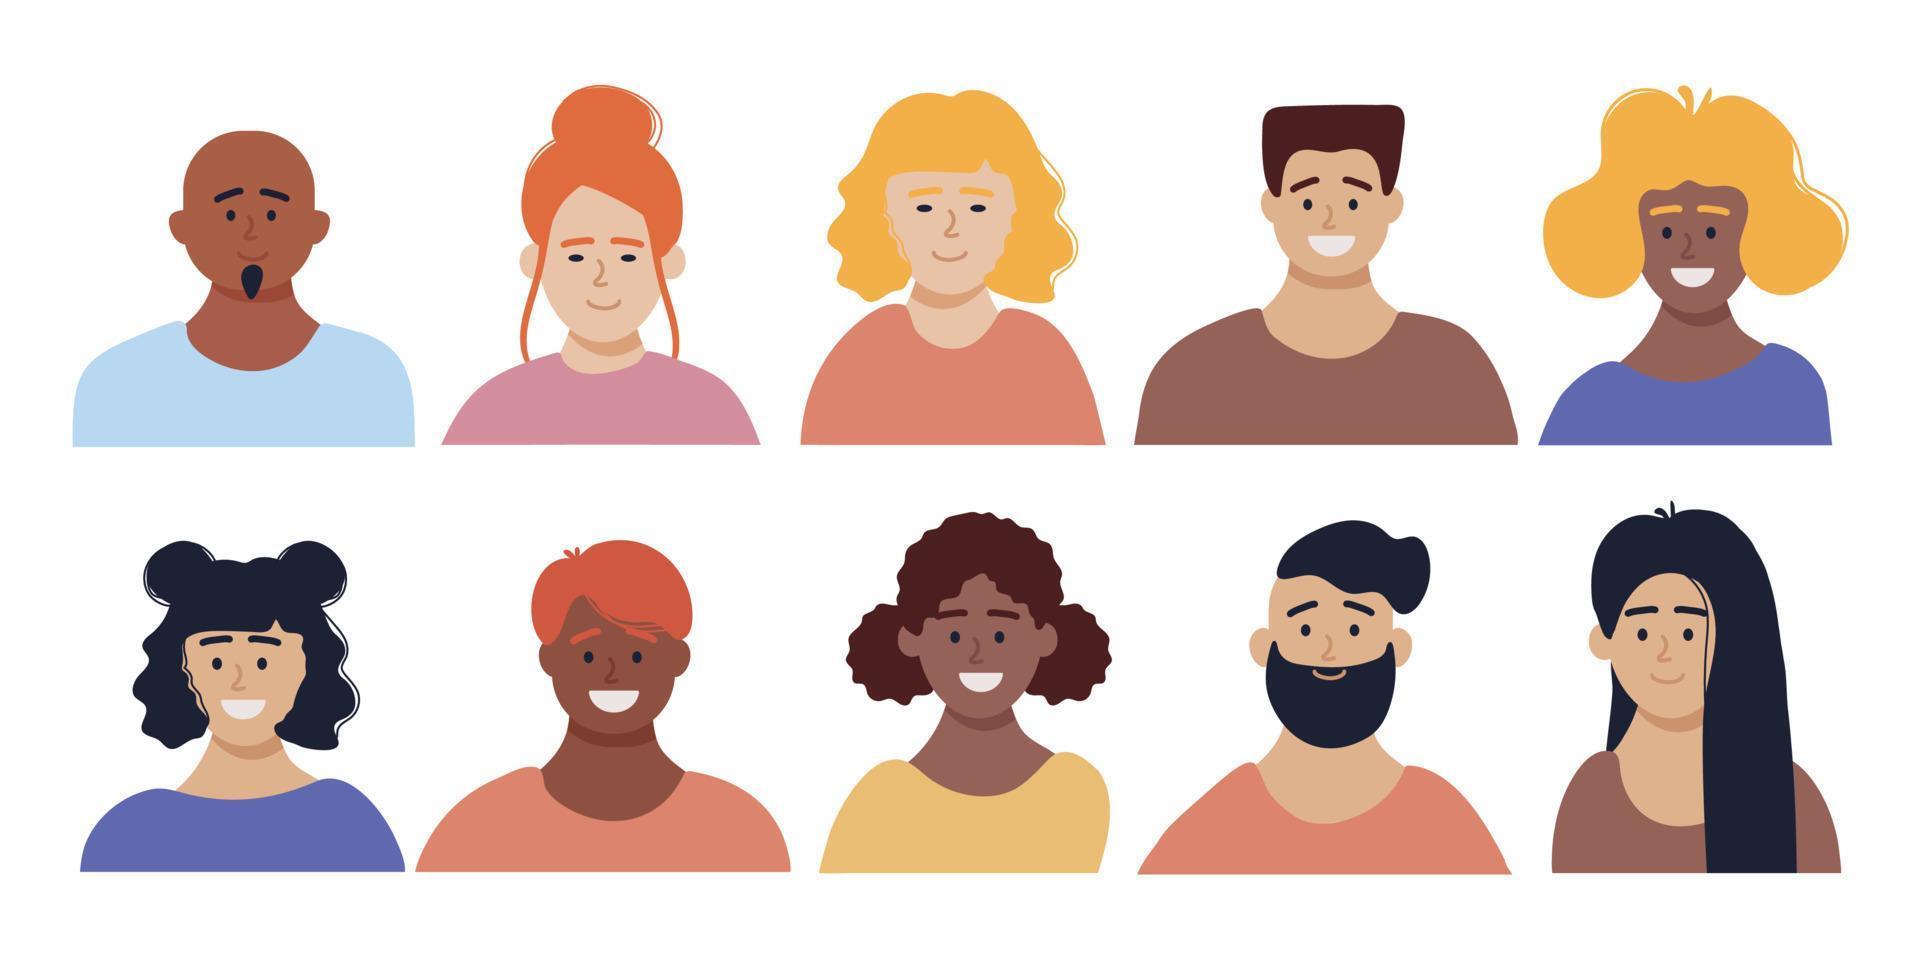 Set of avatars of happy people, characters. Men and women of different cultures and nationalities. Social diversity. Flat cartoon vector illustration.